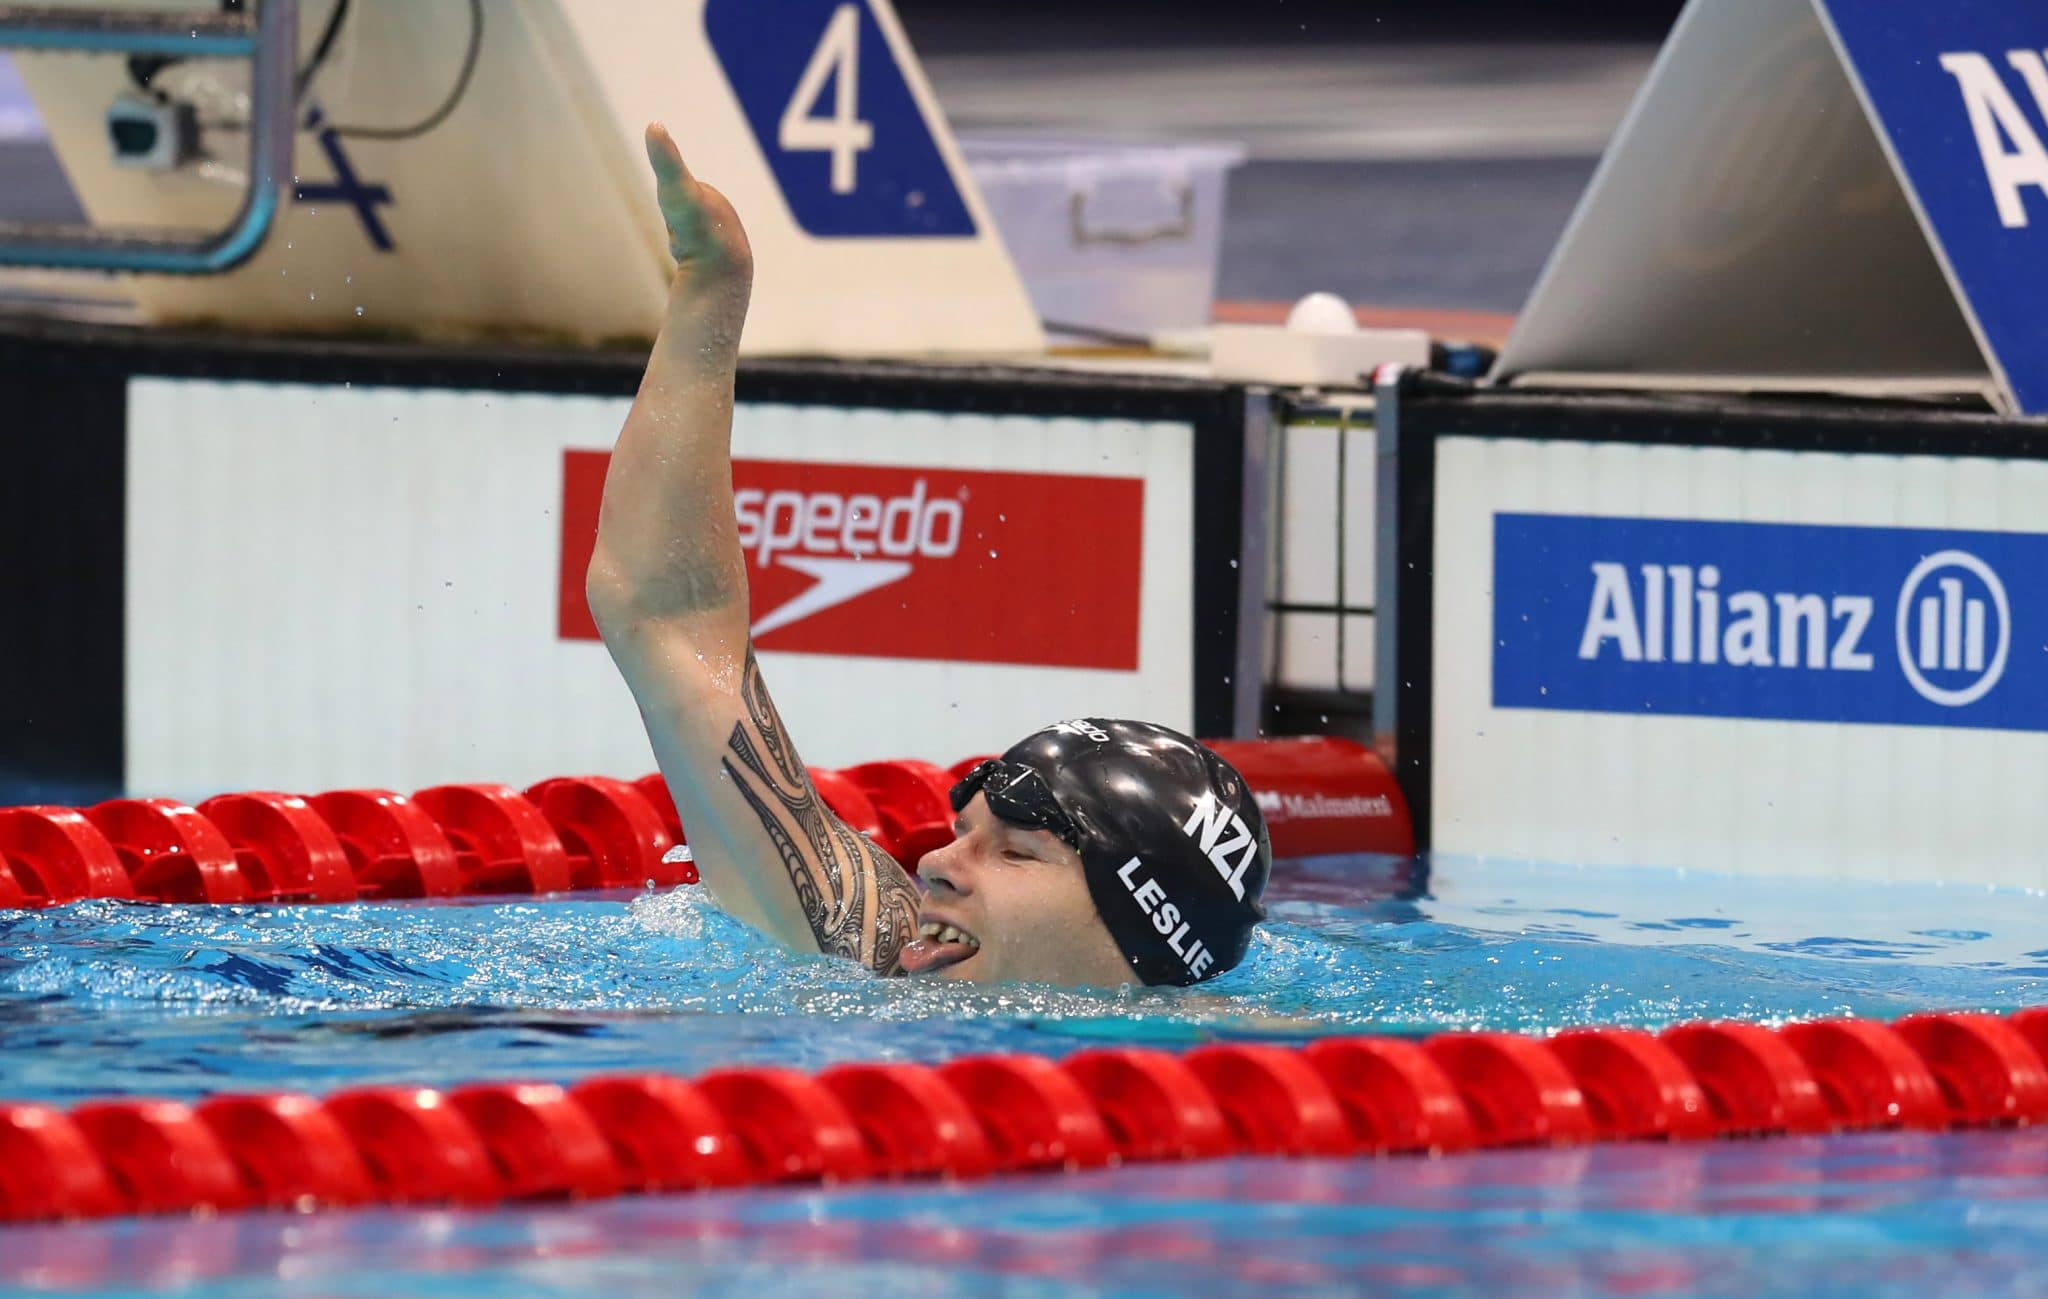 2019 World Para Swimming Championships Day 5: Cameron Leslie breaks 15-year-old World Record - Paralympics New Zealand